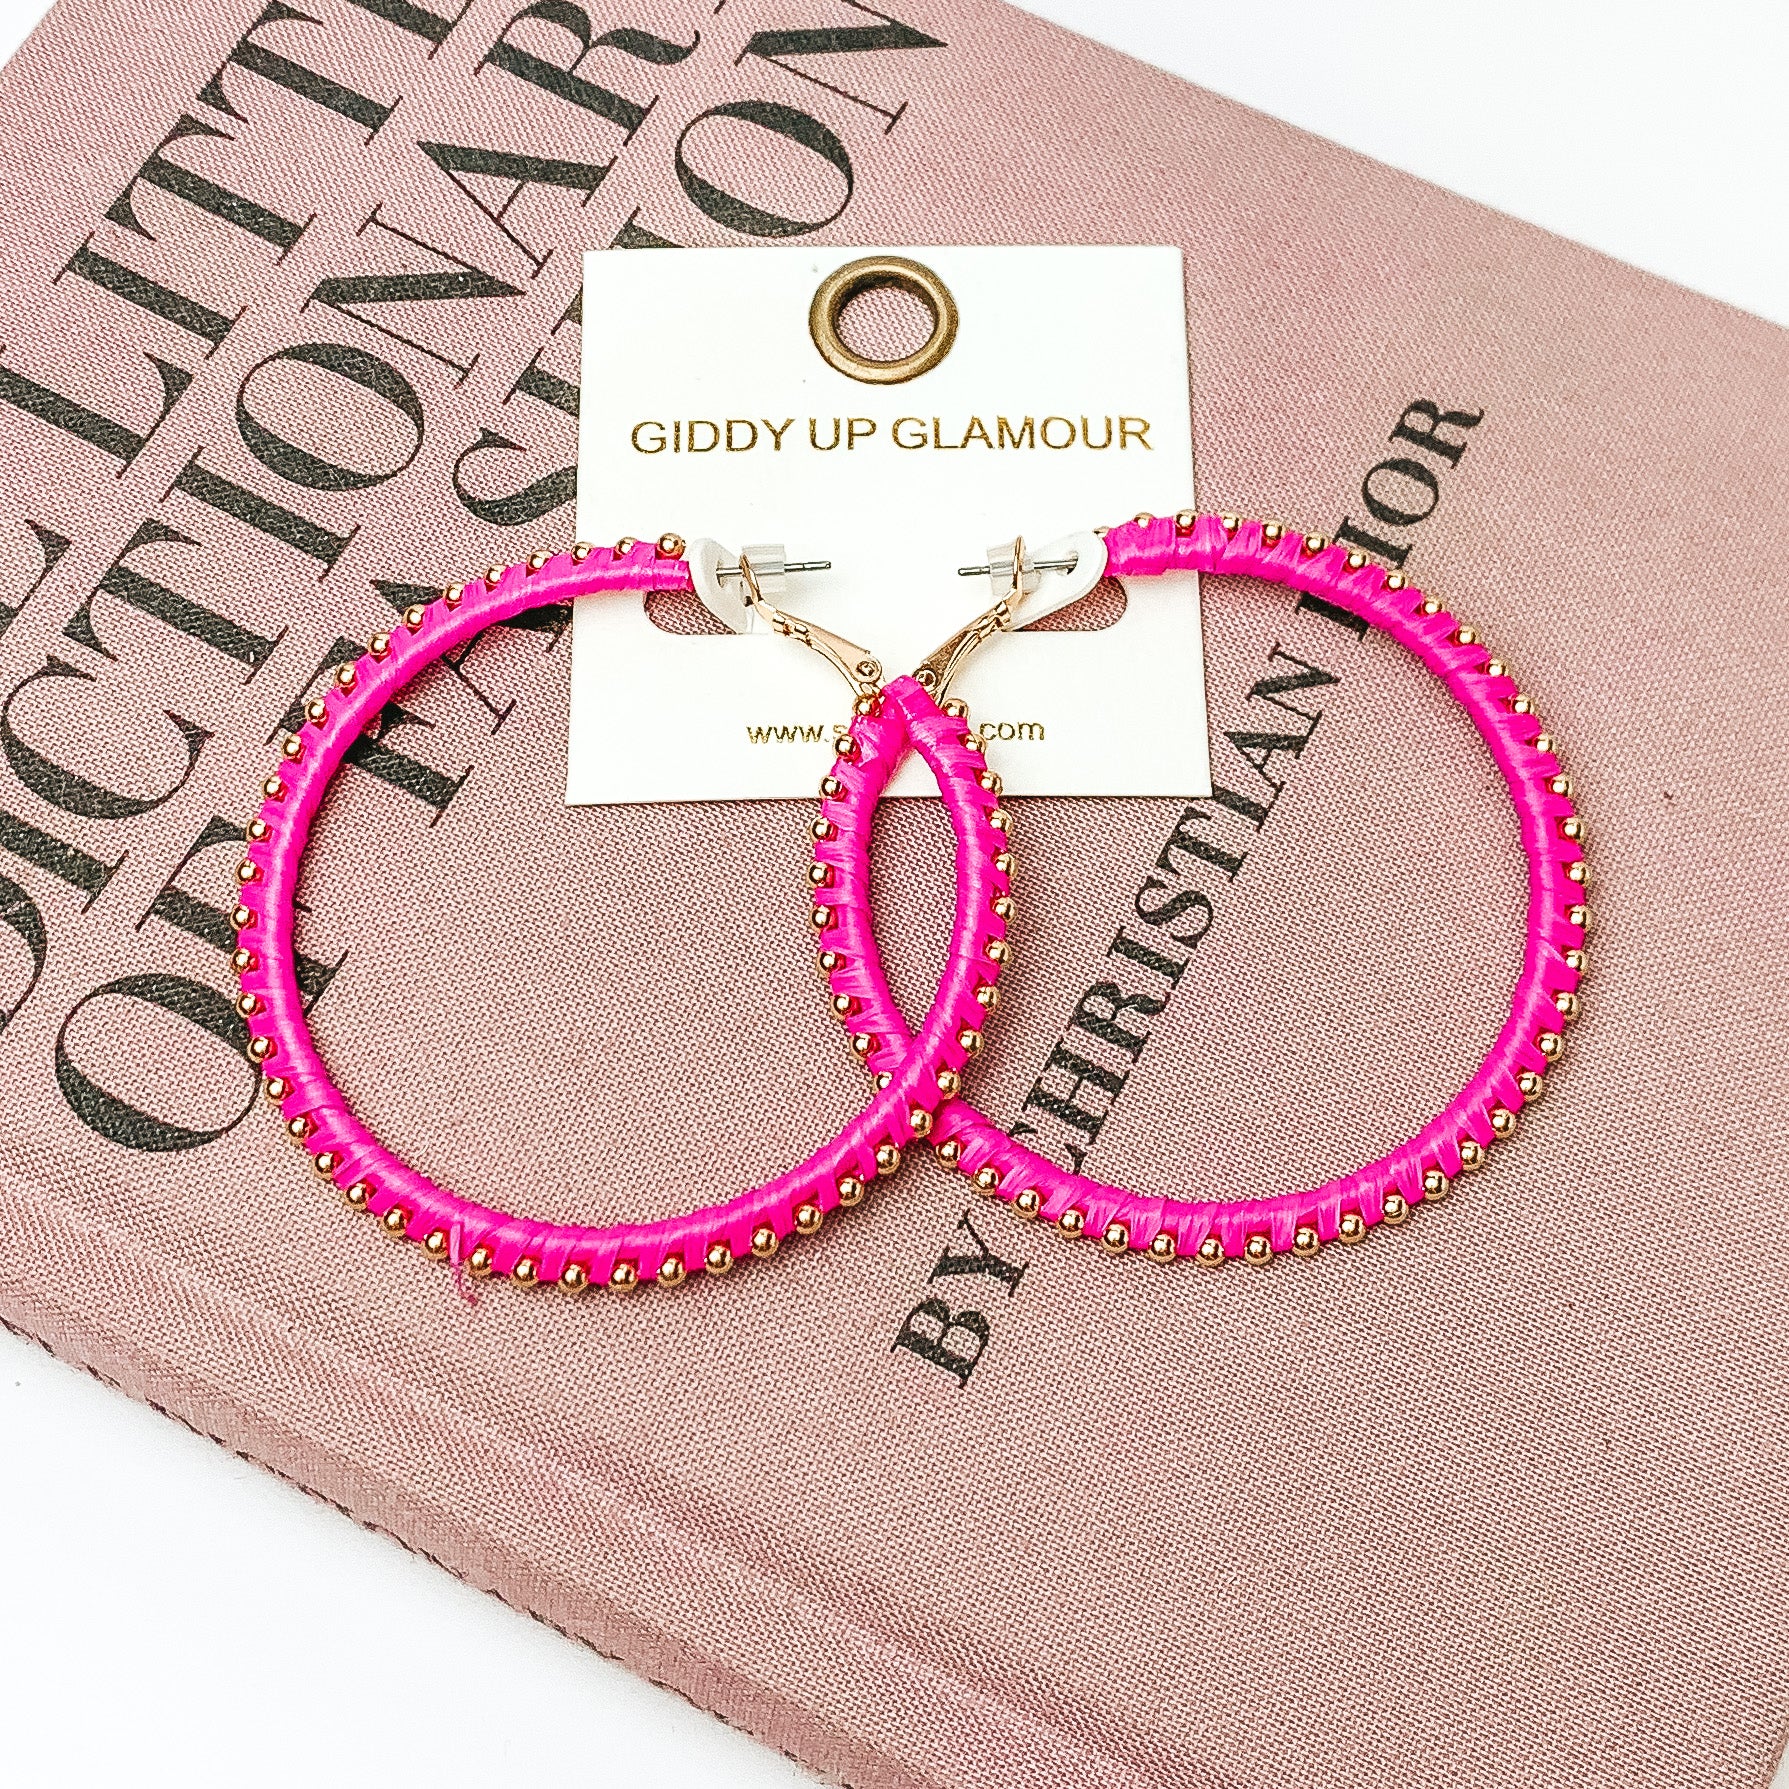 Pictured are circle hot pink hoop earrings with gold beads around it. They are pictured with a pink fashion journal on a white background.